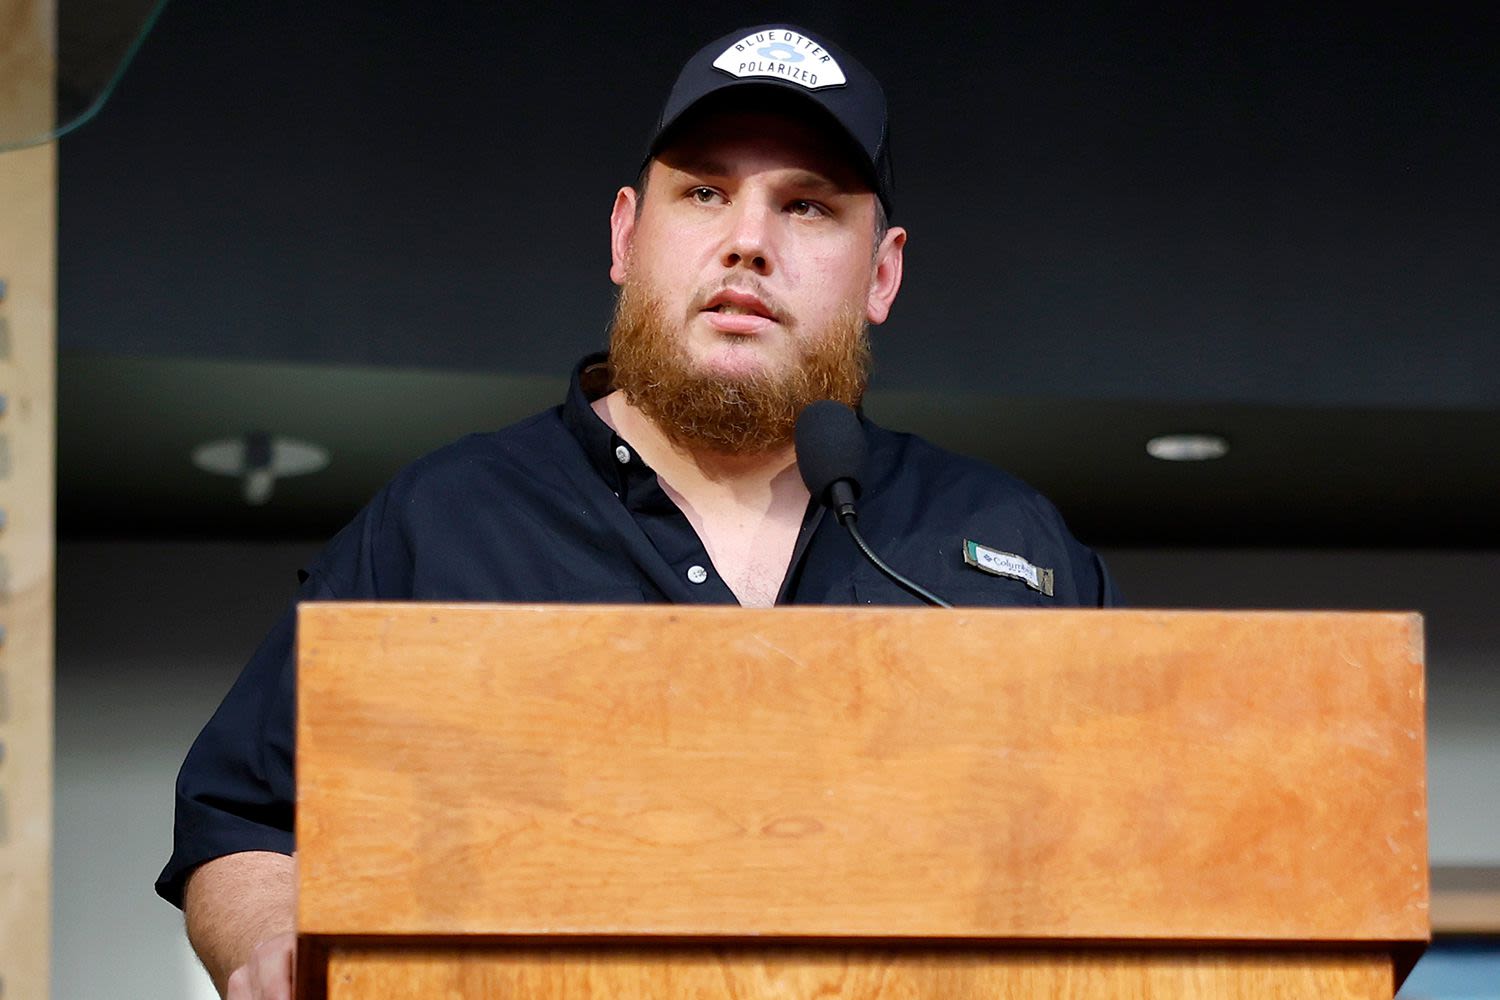 Luke Combs Takes 2 Sons Through His New Museum Exhibit: 'I Just Wanted to Have Those Pictures' (Exclusive)